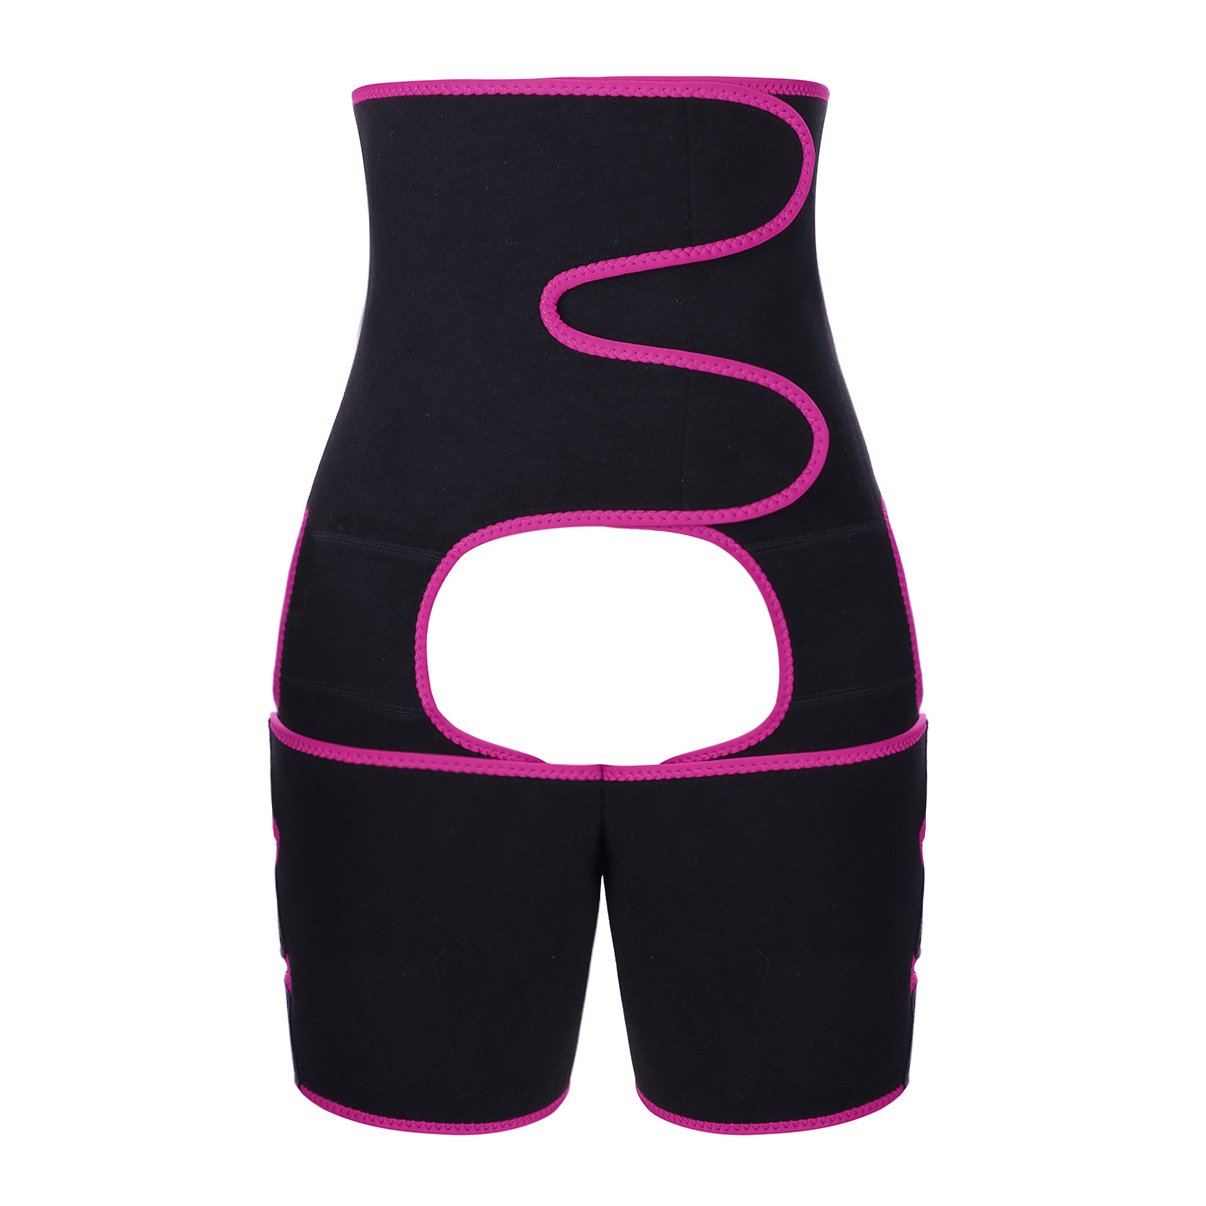 Neoprene-Thigh-Shaper-High-Waist-Body-Shaper-Slimmer-Wrap-Thermo-Trainer-Sport-Waist-Protective-Acce-1666105-2